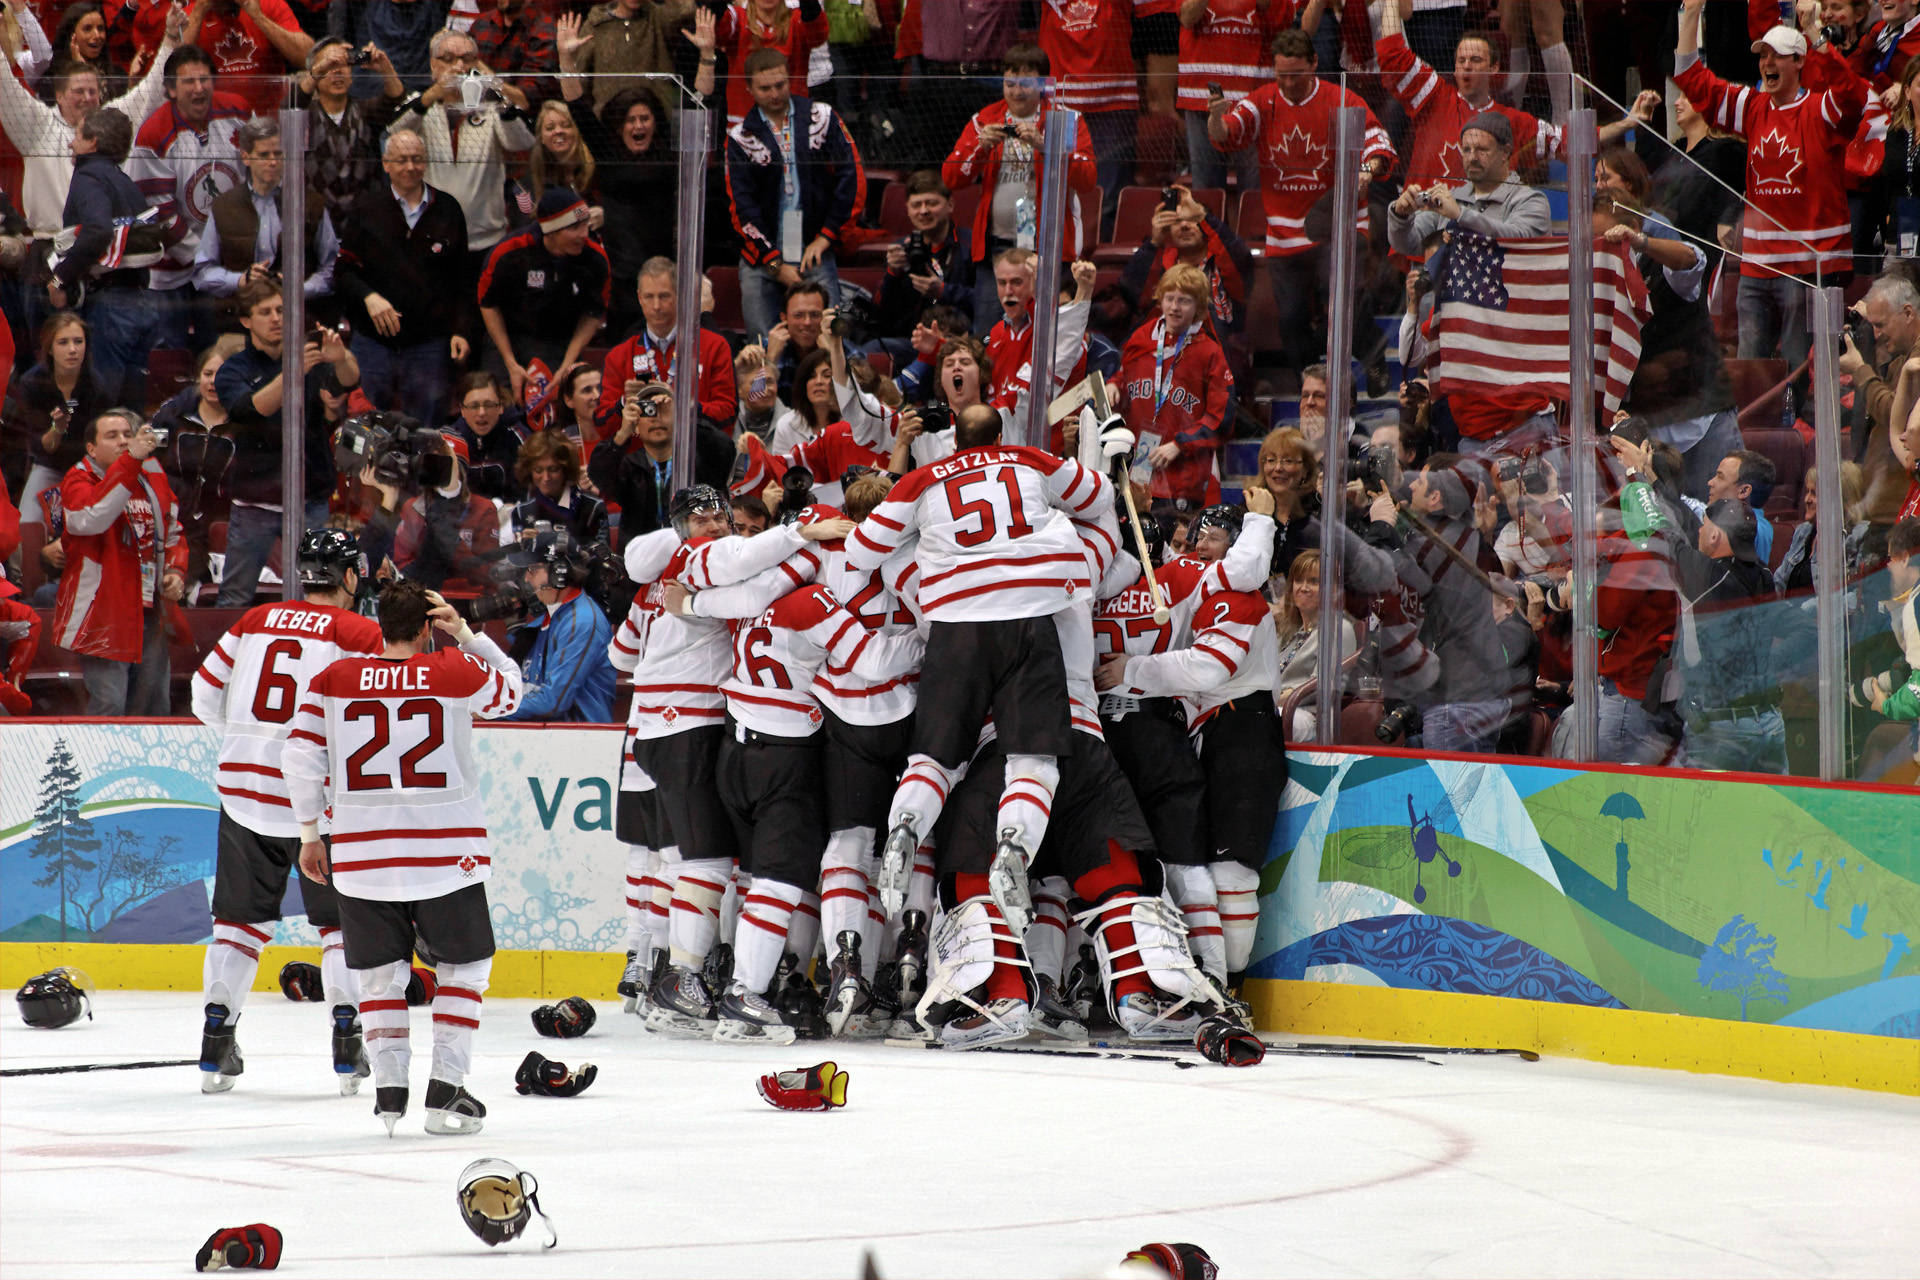 Feb. 28, 2010 - Vancouver, British Columbia, Canada - Canada's SIDNEY CROSBY  celebrates his game winning goal over USA's RYAN MILLER in overtime to give  Canada the gold medal in Men's Gold